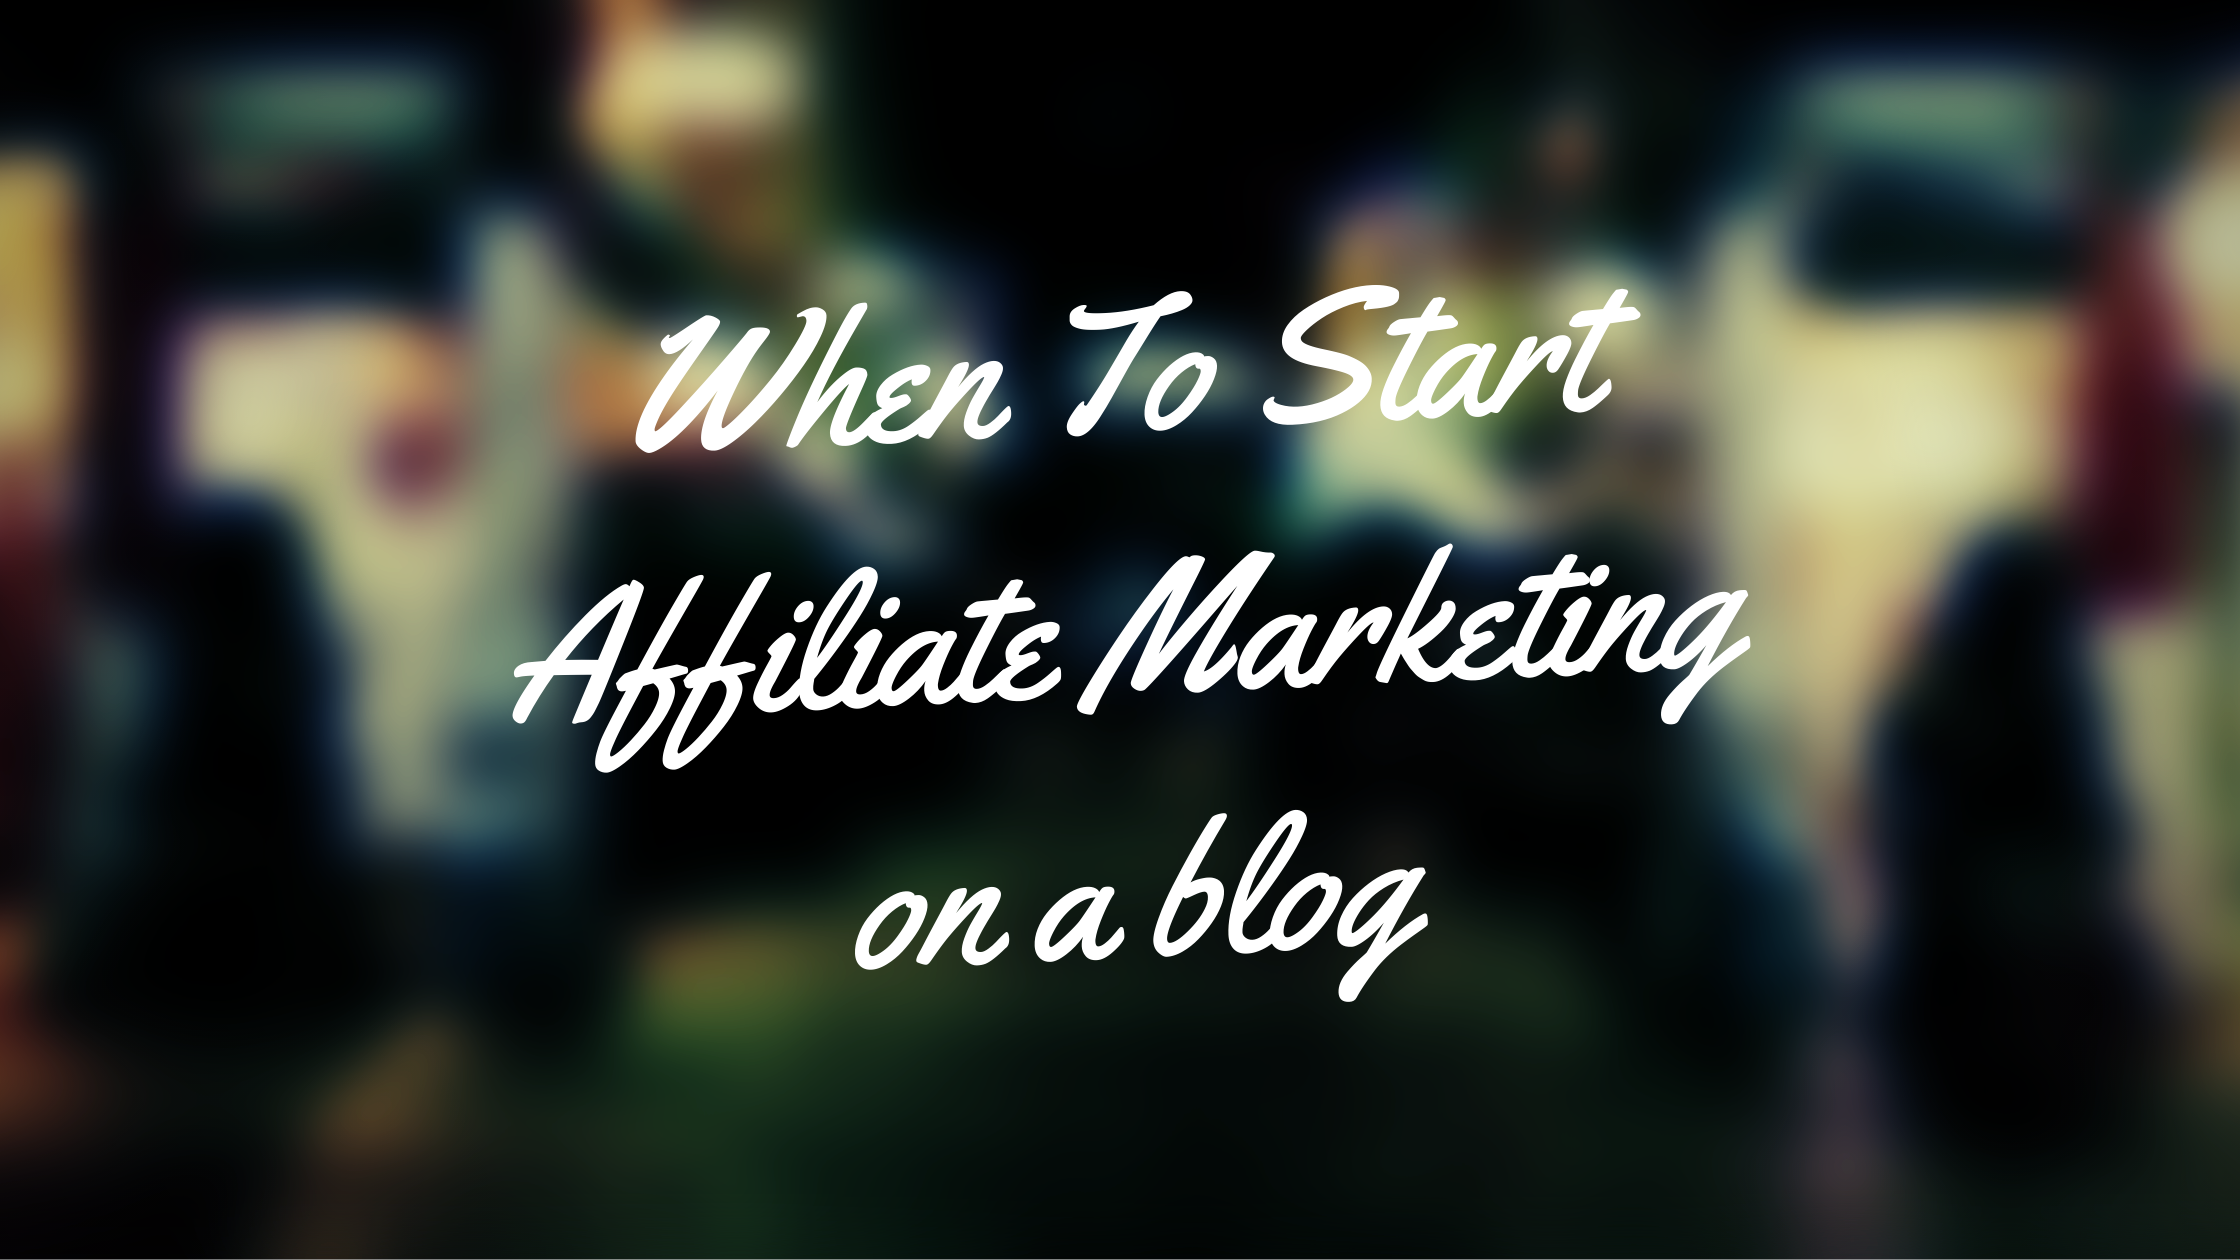 When To Start Affiliate Marketing On a Blog (Best Time)